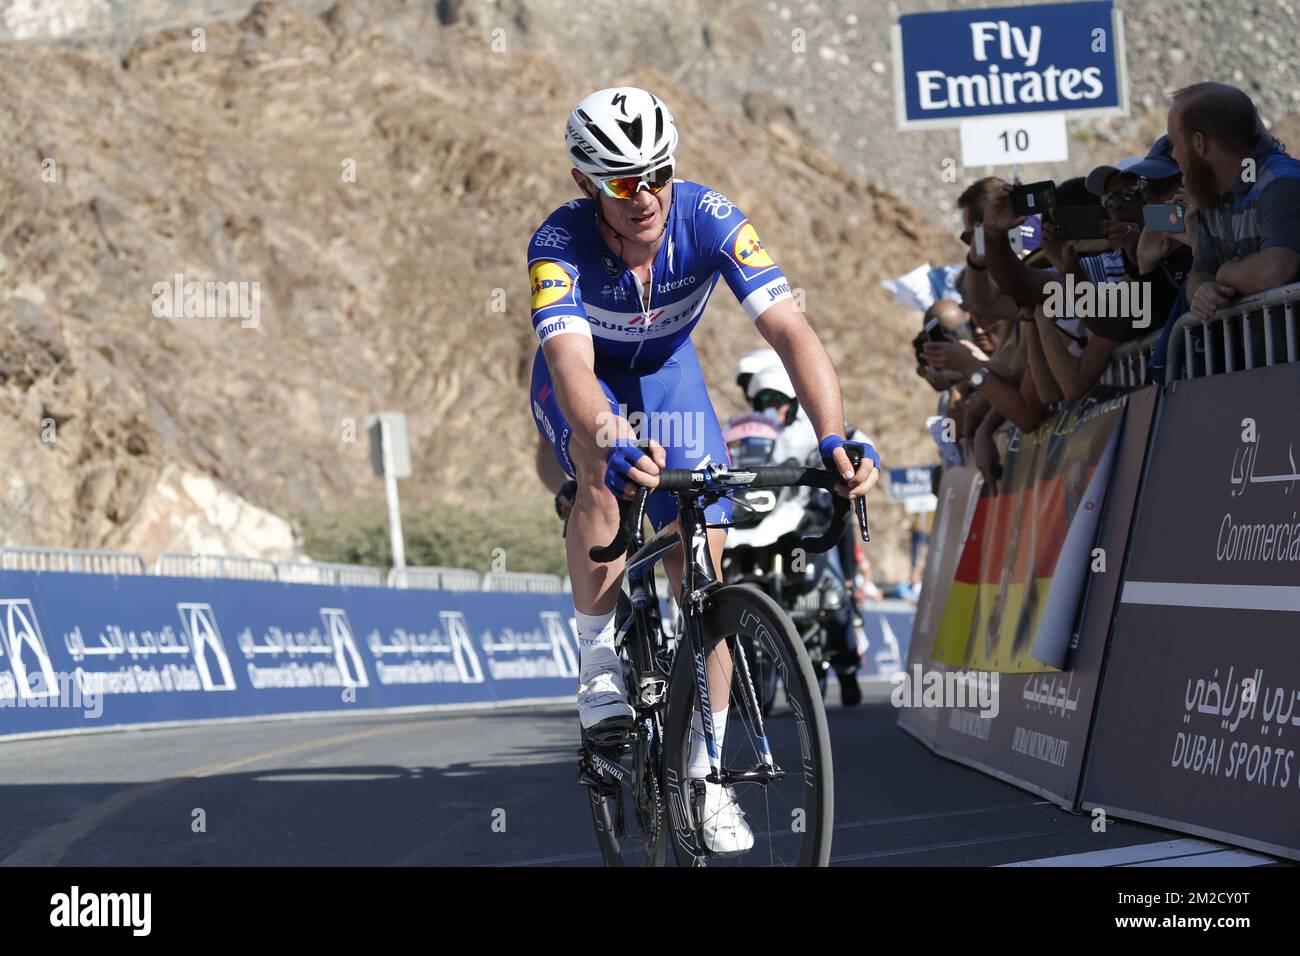 Belgian Yves Lampaert of Quick-Step Floors pictured in action during stage 4 of the Dubai Tour 2018 cycling race, 172km from Dubai to Hatta Dam, United Arab Emirates, Friday 09 February 2018. The Dubai Tour 2018 is taking place from 6 to 10 February. BELGA PHOTO YUZURU SUNADA Stock Photo